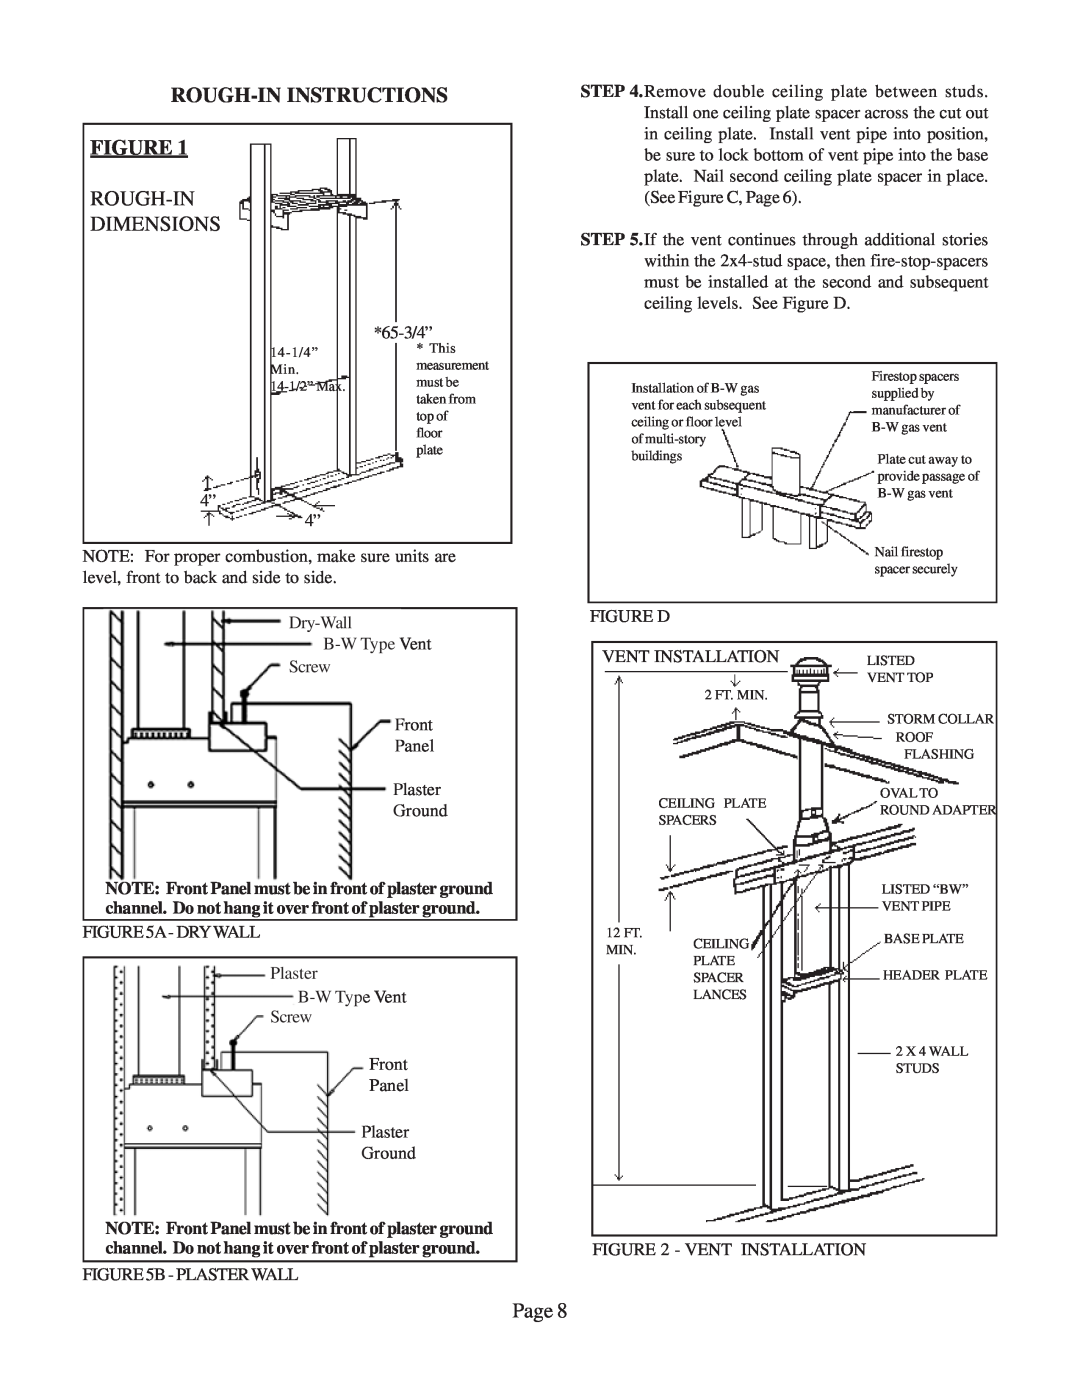 Louisville Tin and Stove W506F, W505F, W256F, W255F warranty Rough-Ininstructions Figure, Rough-In Dimensions, Page 